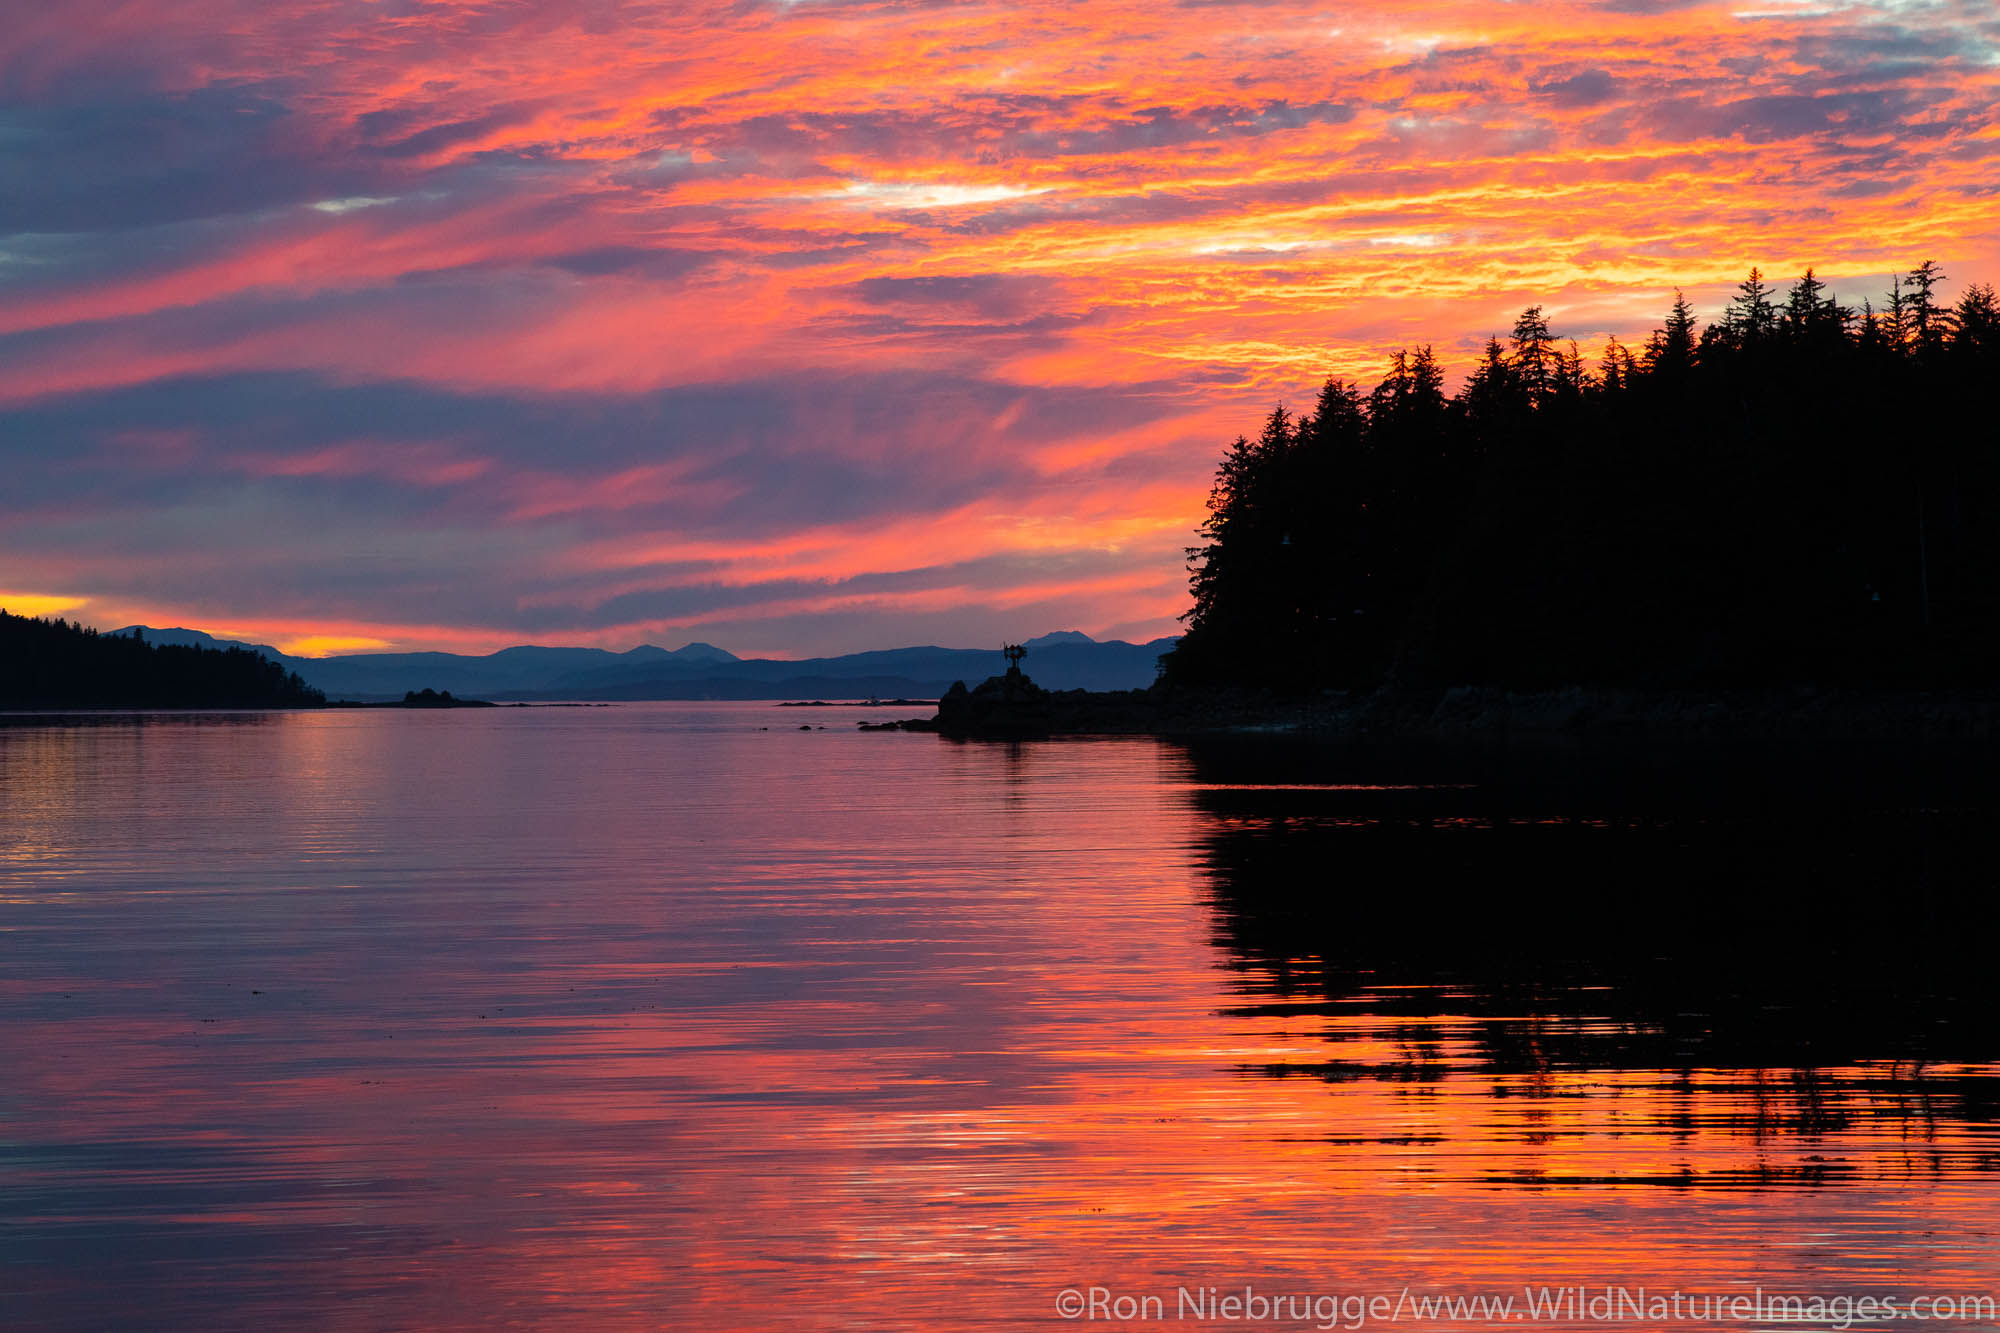 Sunset over Frederick Sound from Cape Fanshaw, Tongass National Forest, Alaska.